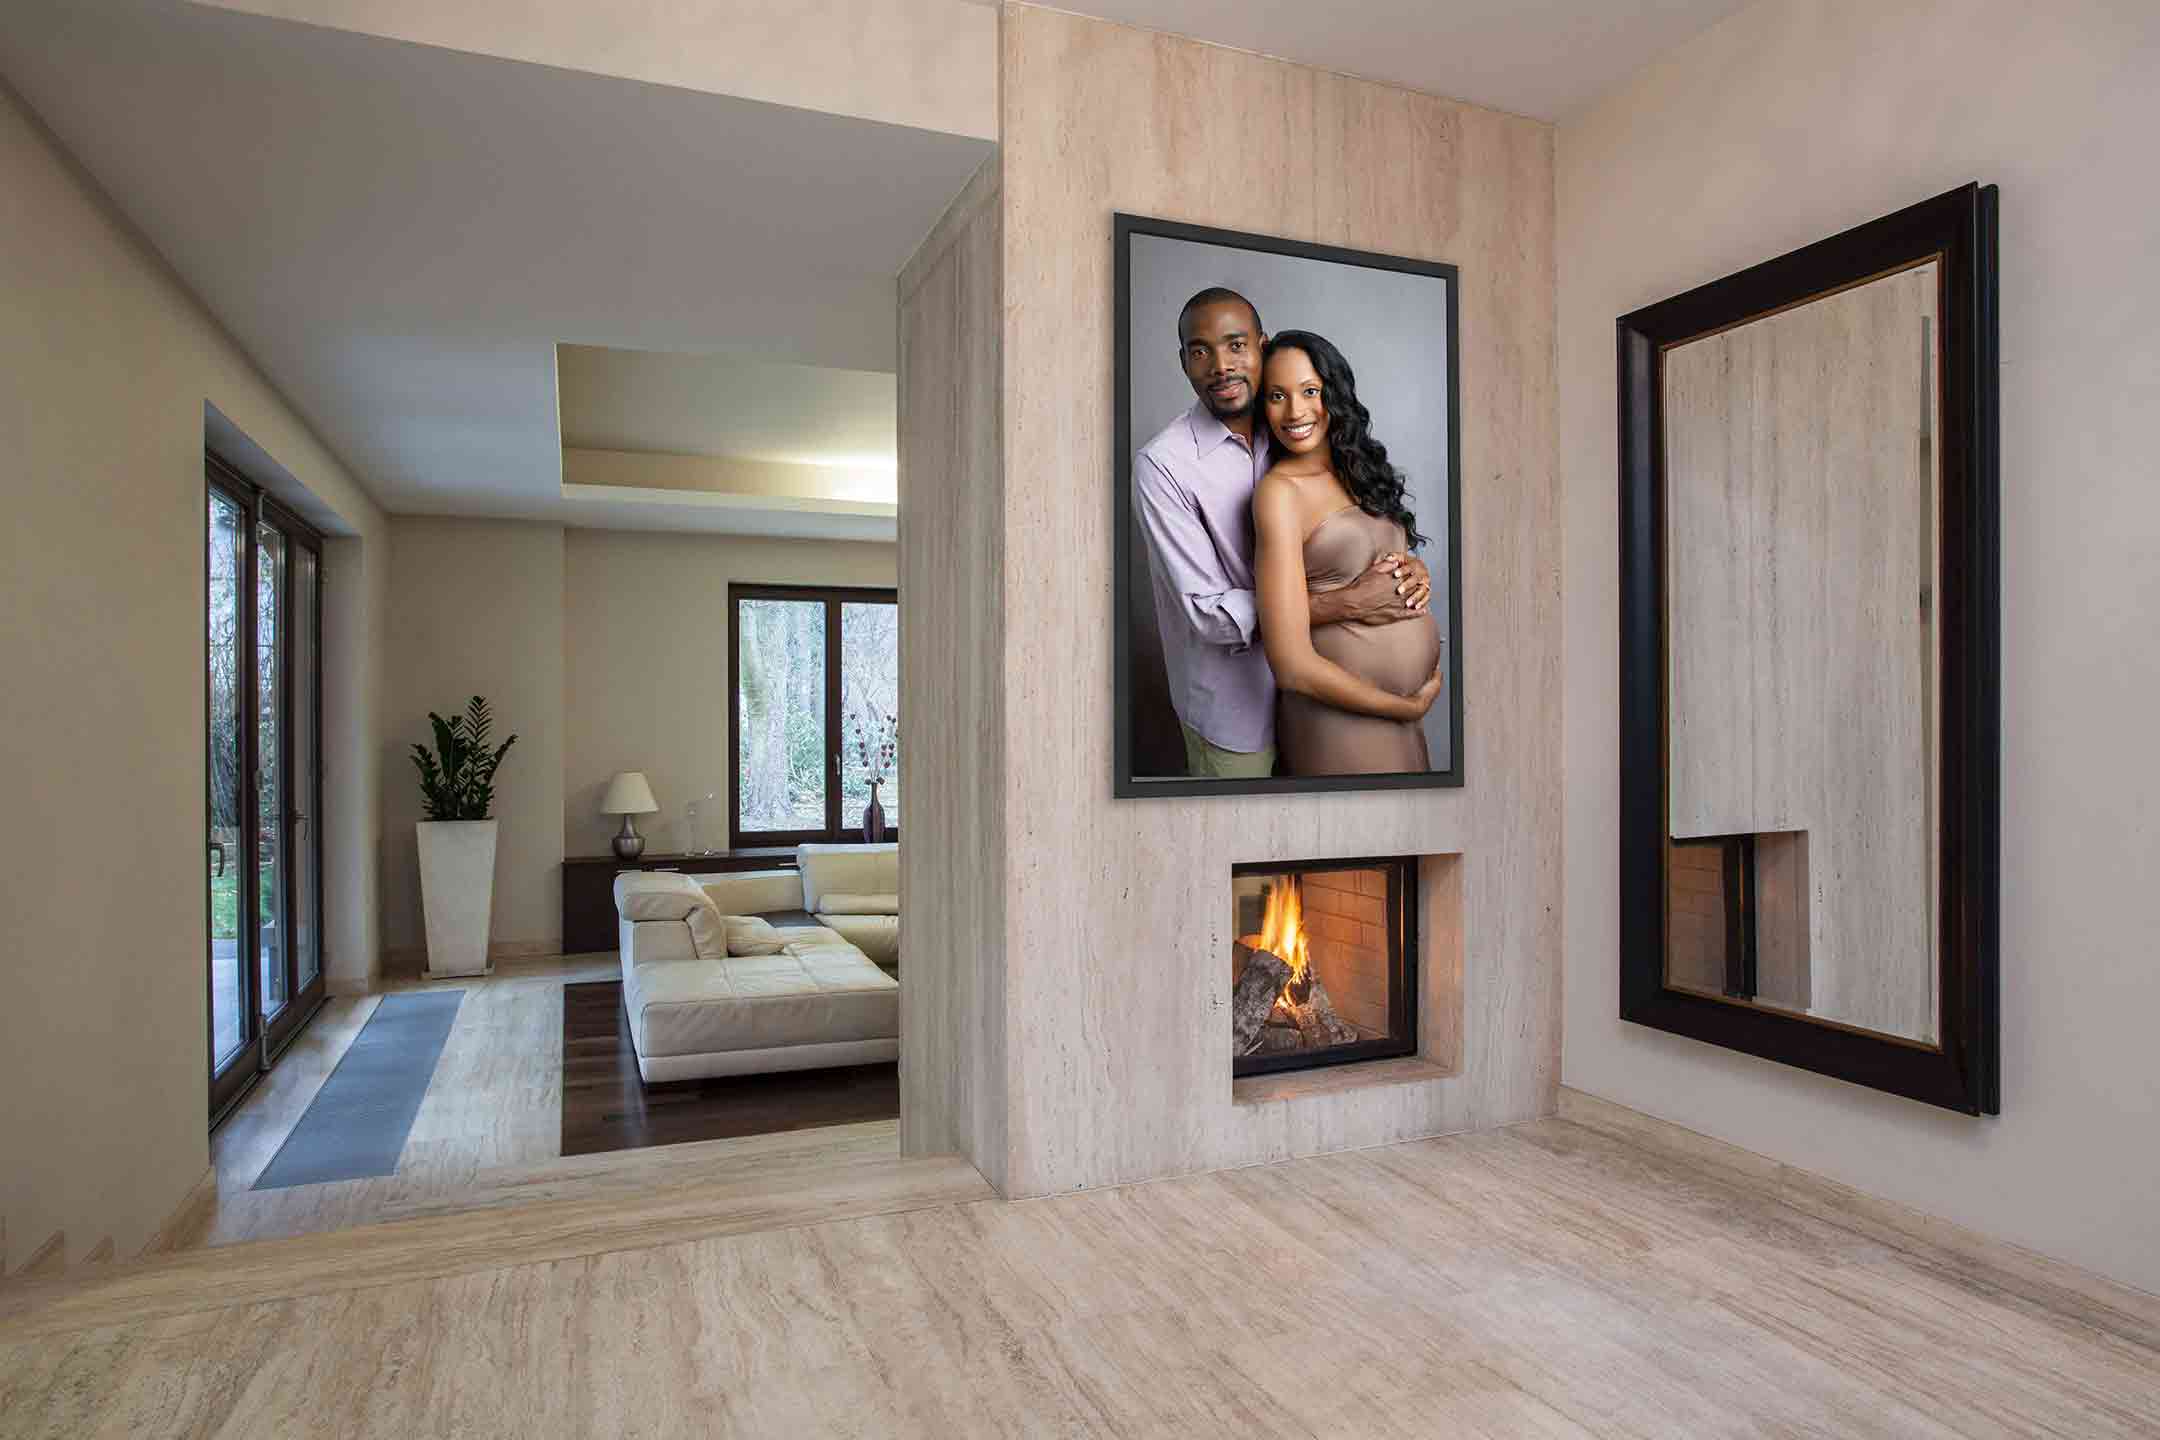 celebrating black fatherhood with picture of a black maternity session image hang in their home